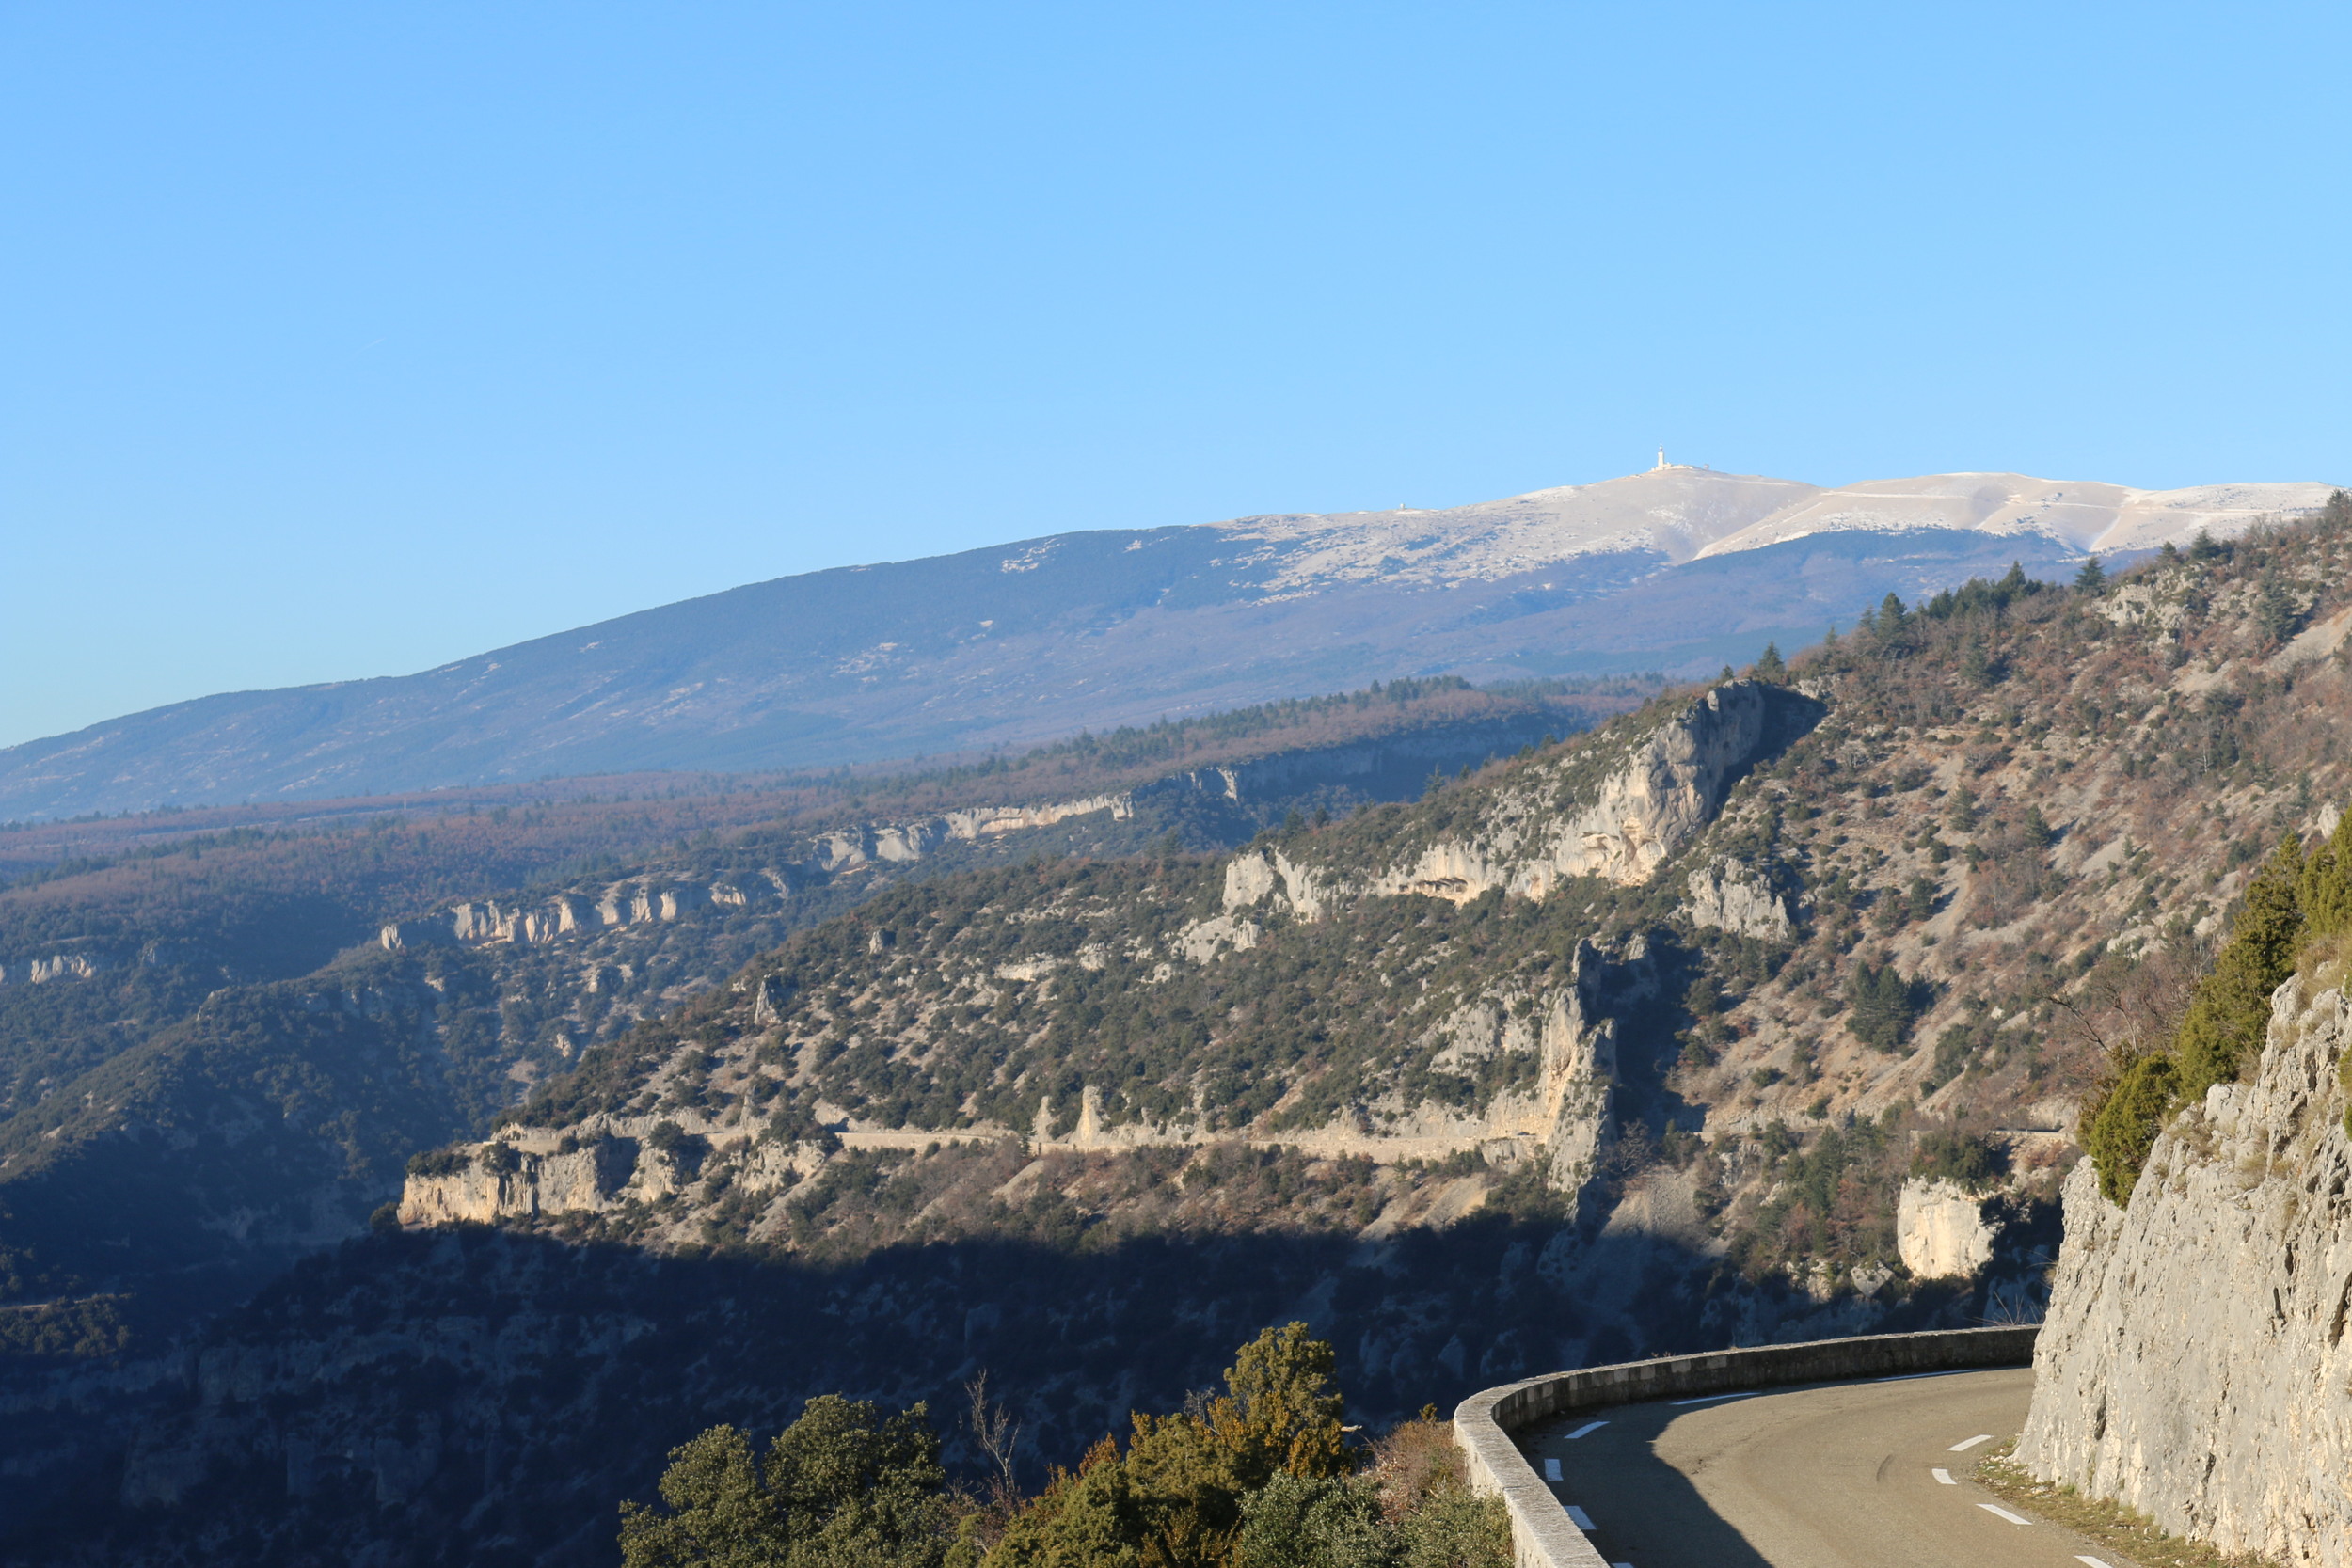 Mont Ventoux in the distance.